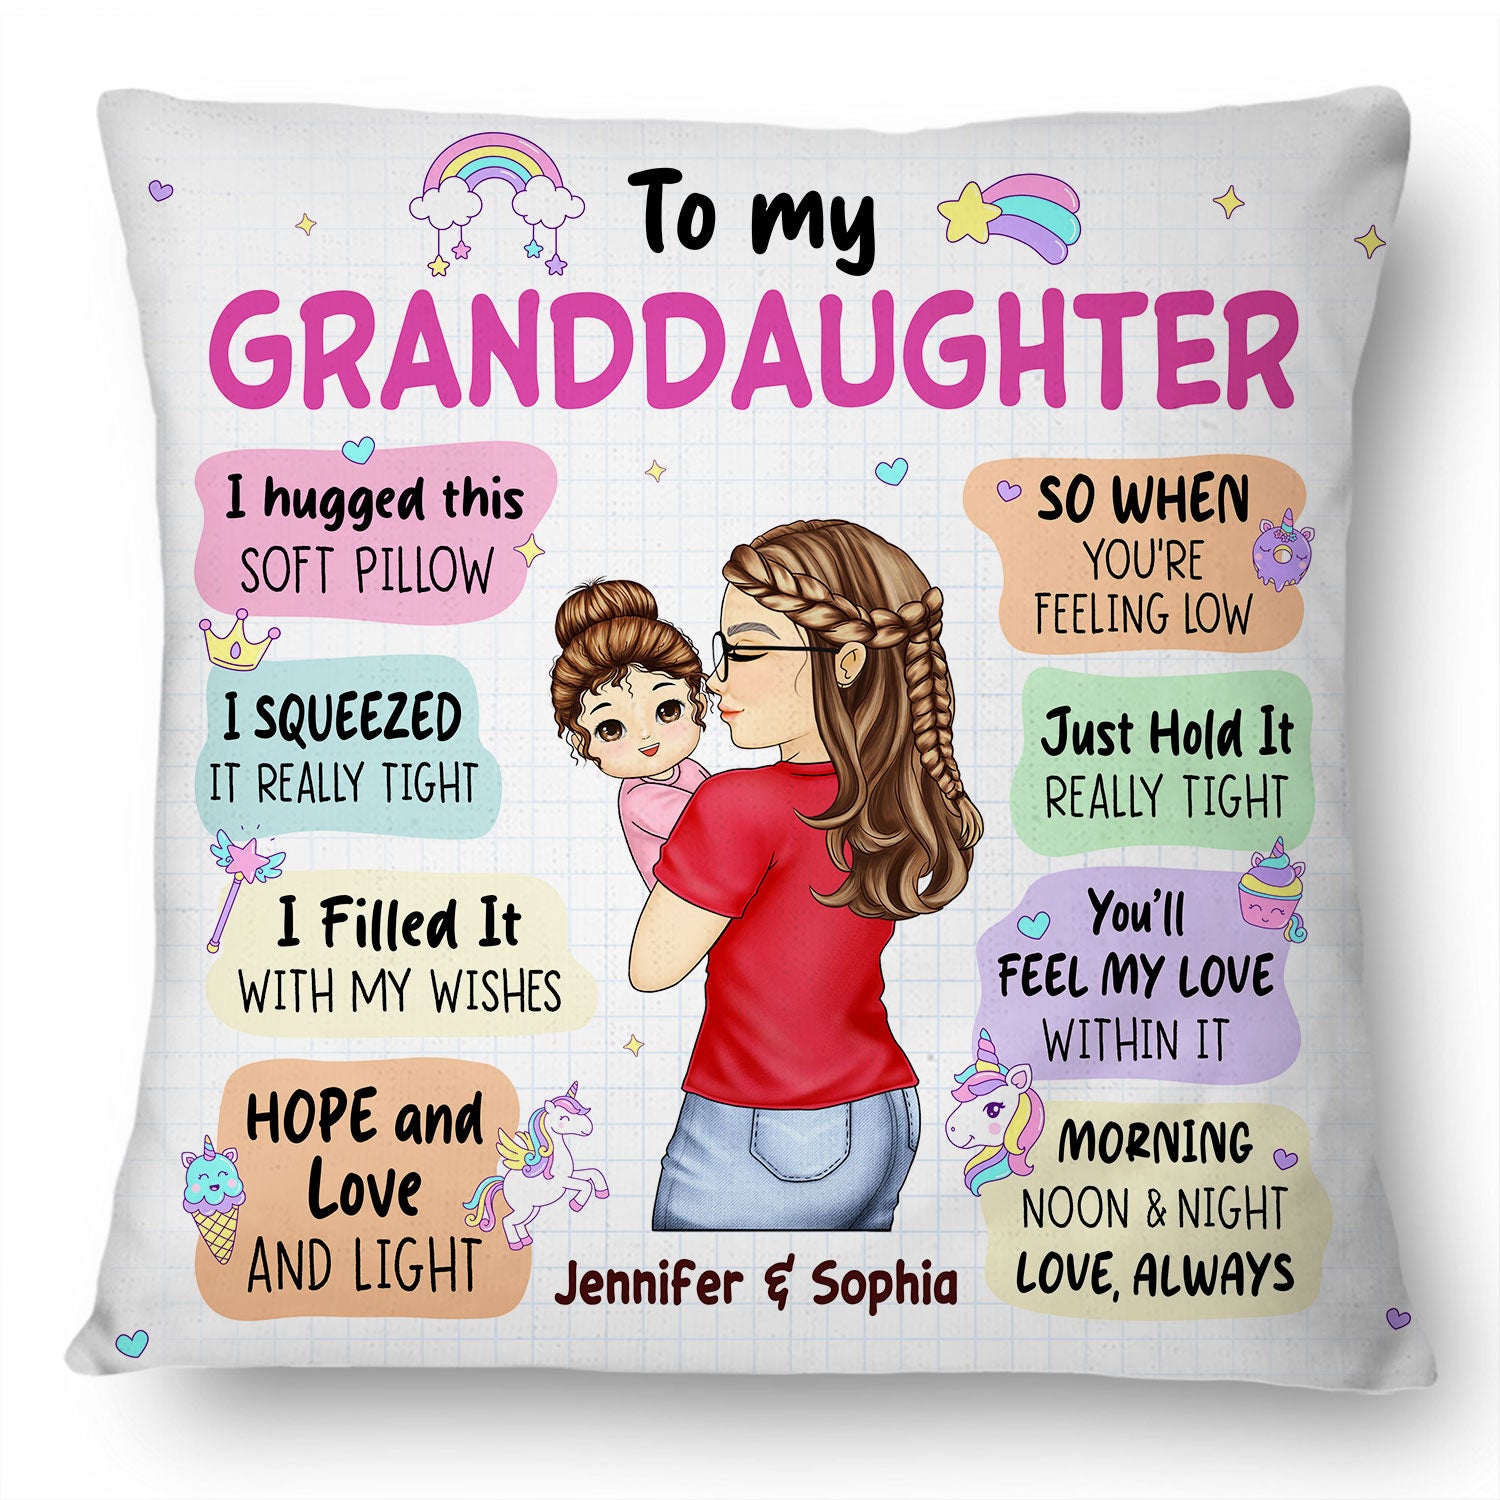 Hugged This Soft Pillow - Gift For Granddaughter, Grandson, Kids - Personalized Pillow